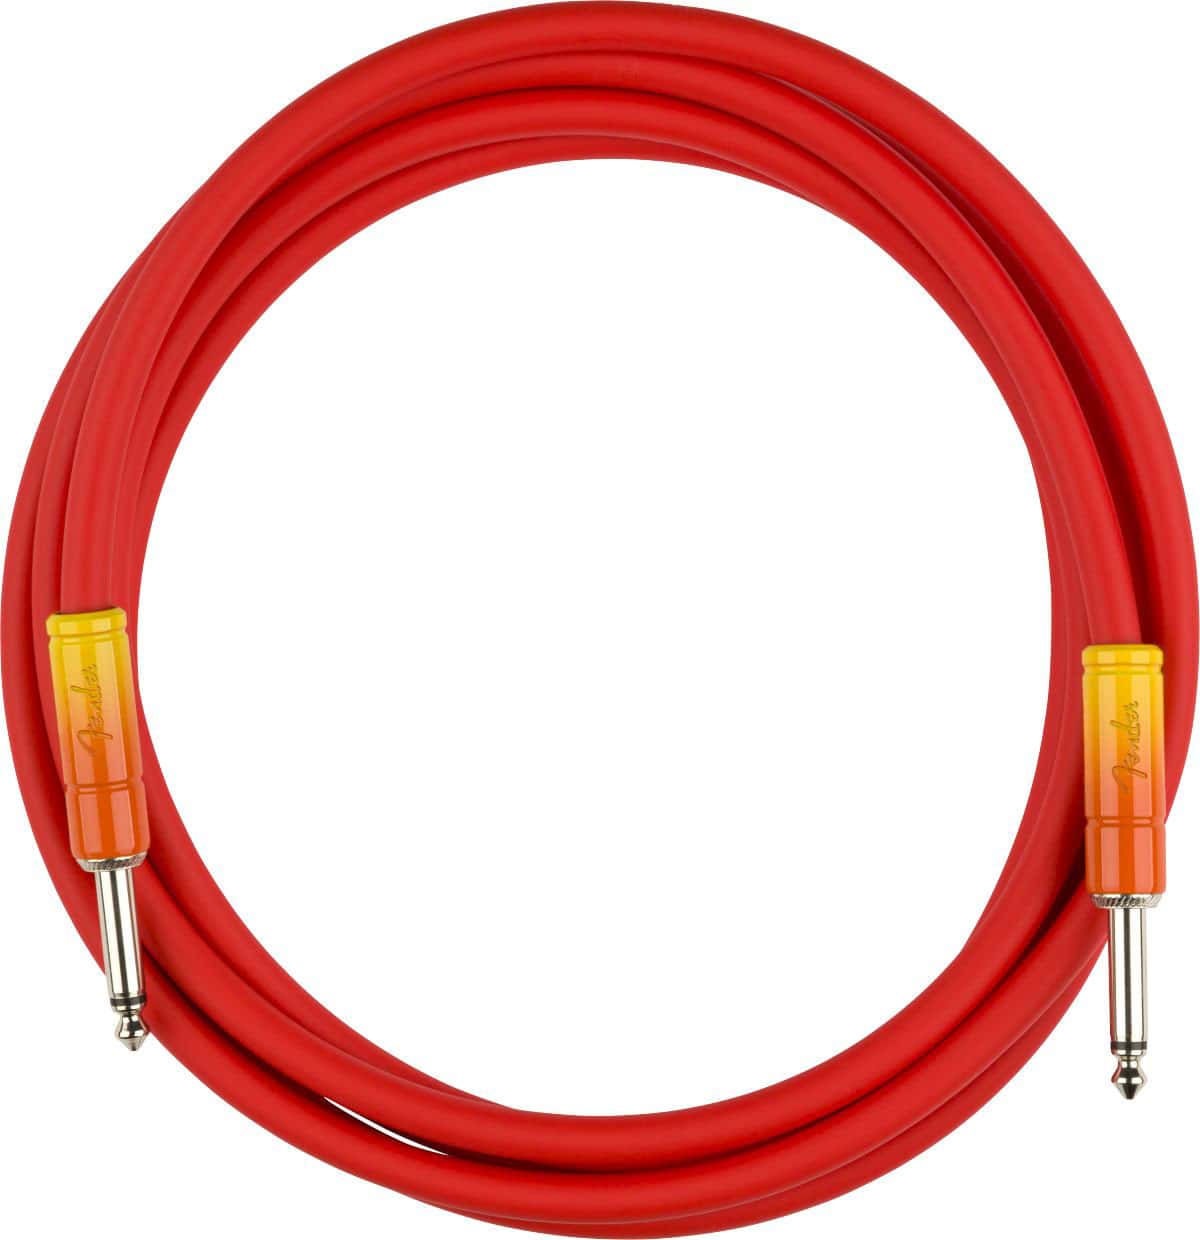 FENDER 10' OMBRE CABLE TEQUILA SUNRISE